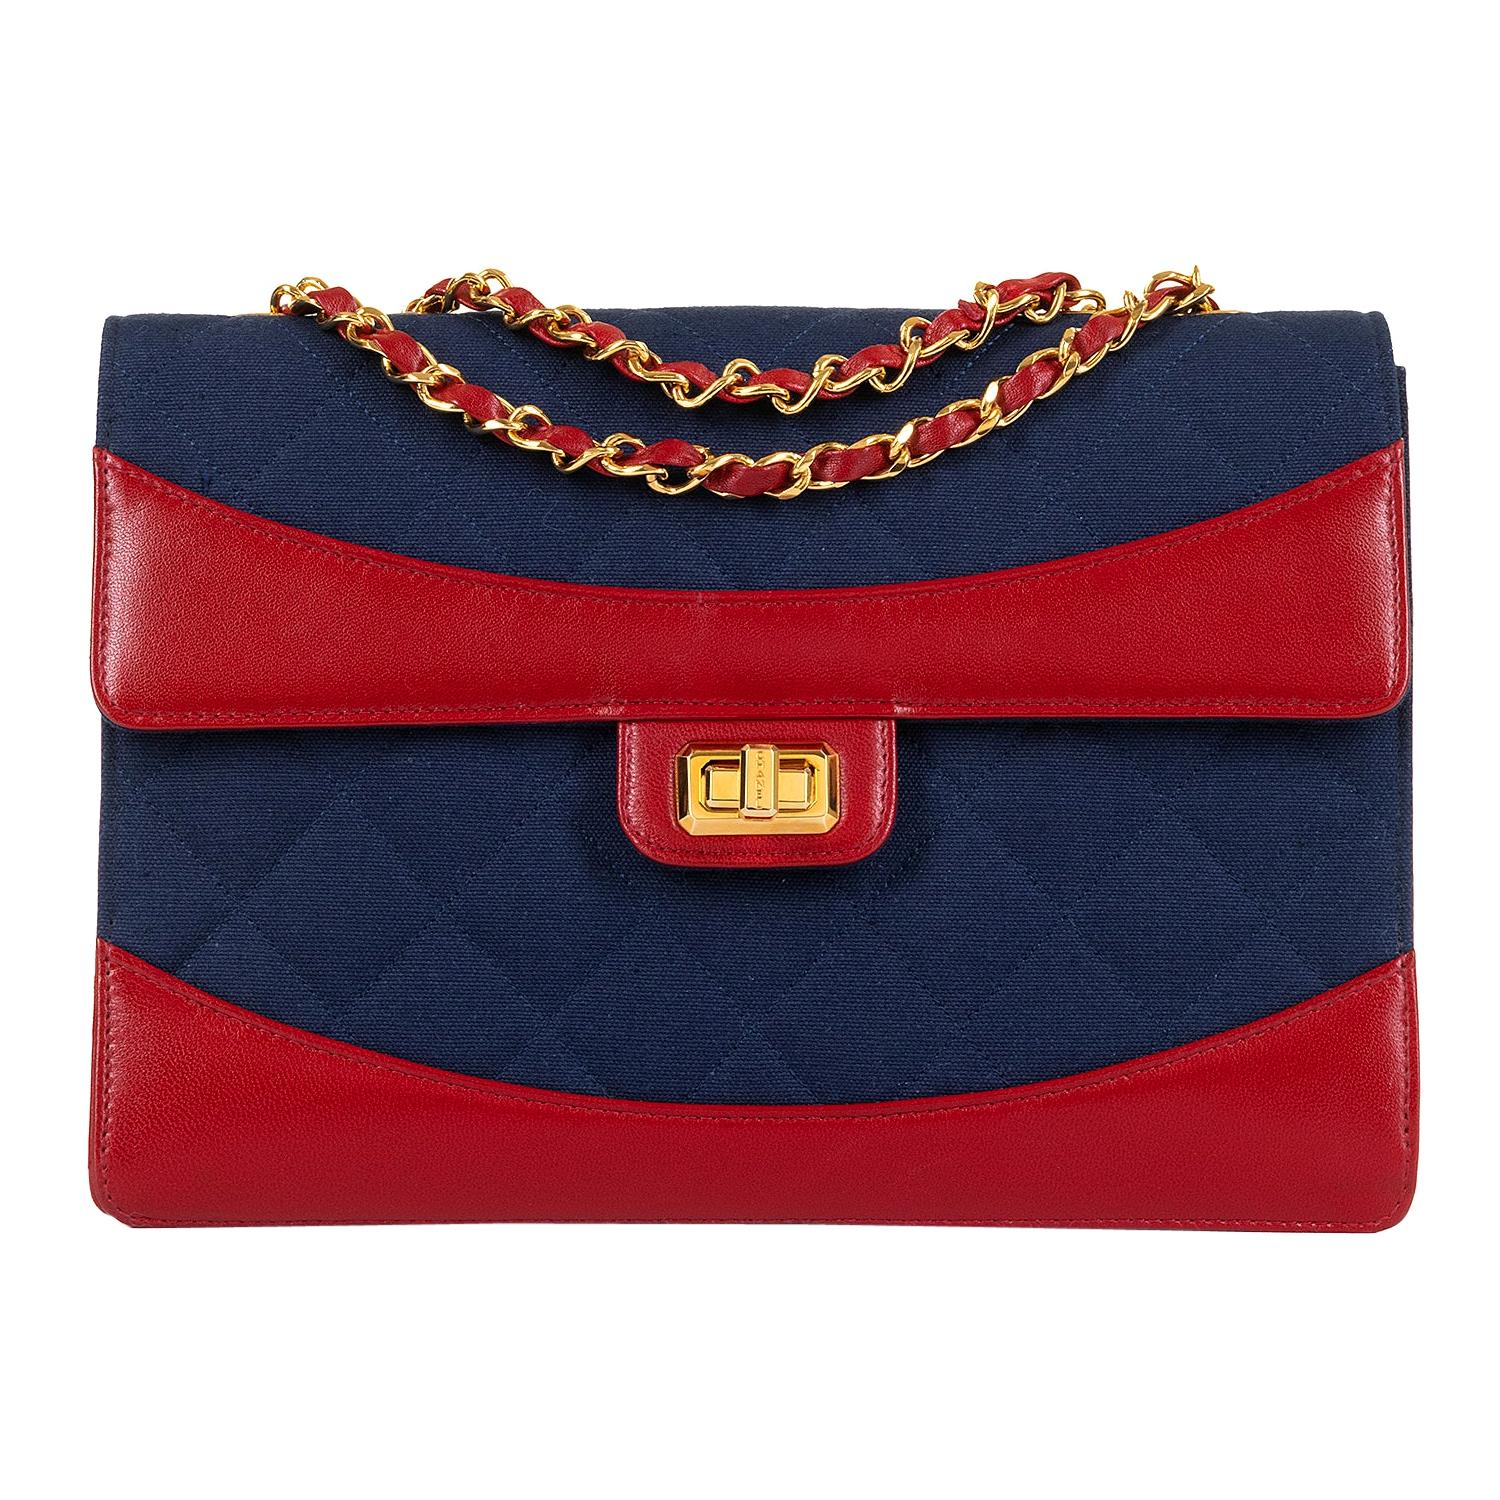 WOW Chanel Vintage Navy Quilted Jersey/Red lambskin 23cm bag by Karl Lagerfeld For Sale